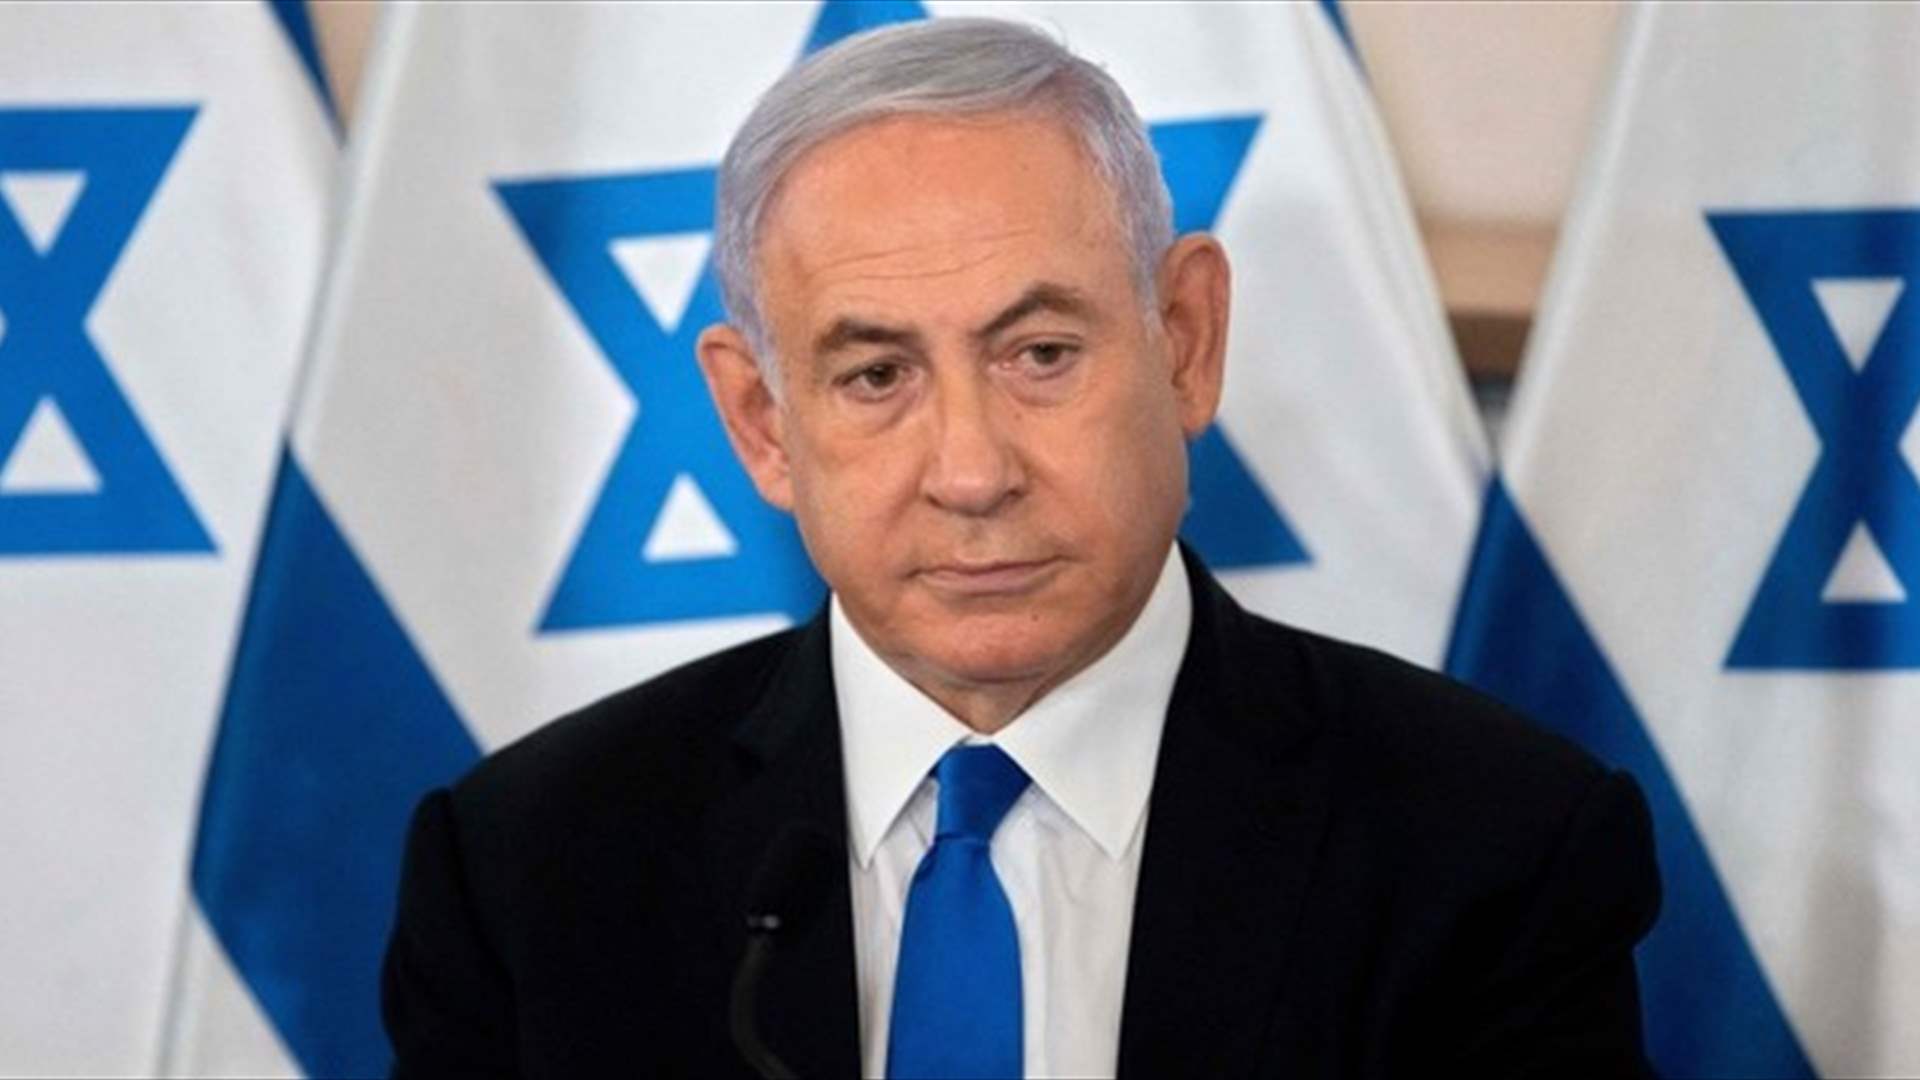 Netanyahu&#39;s health condition is &quot;good&quot; after pacemaker implantation